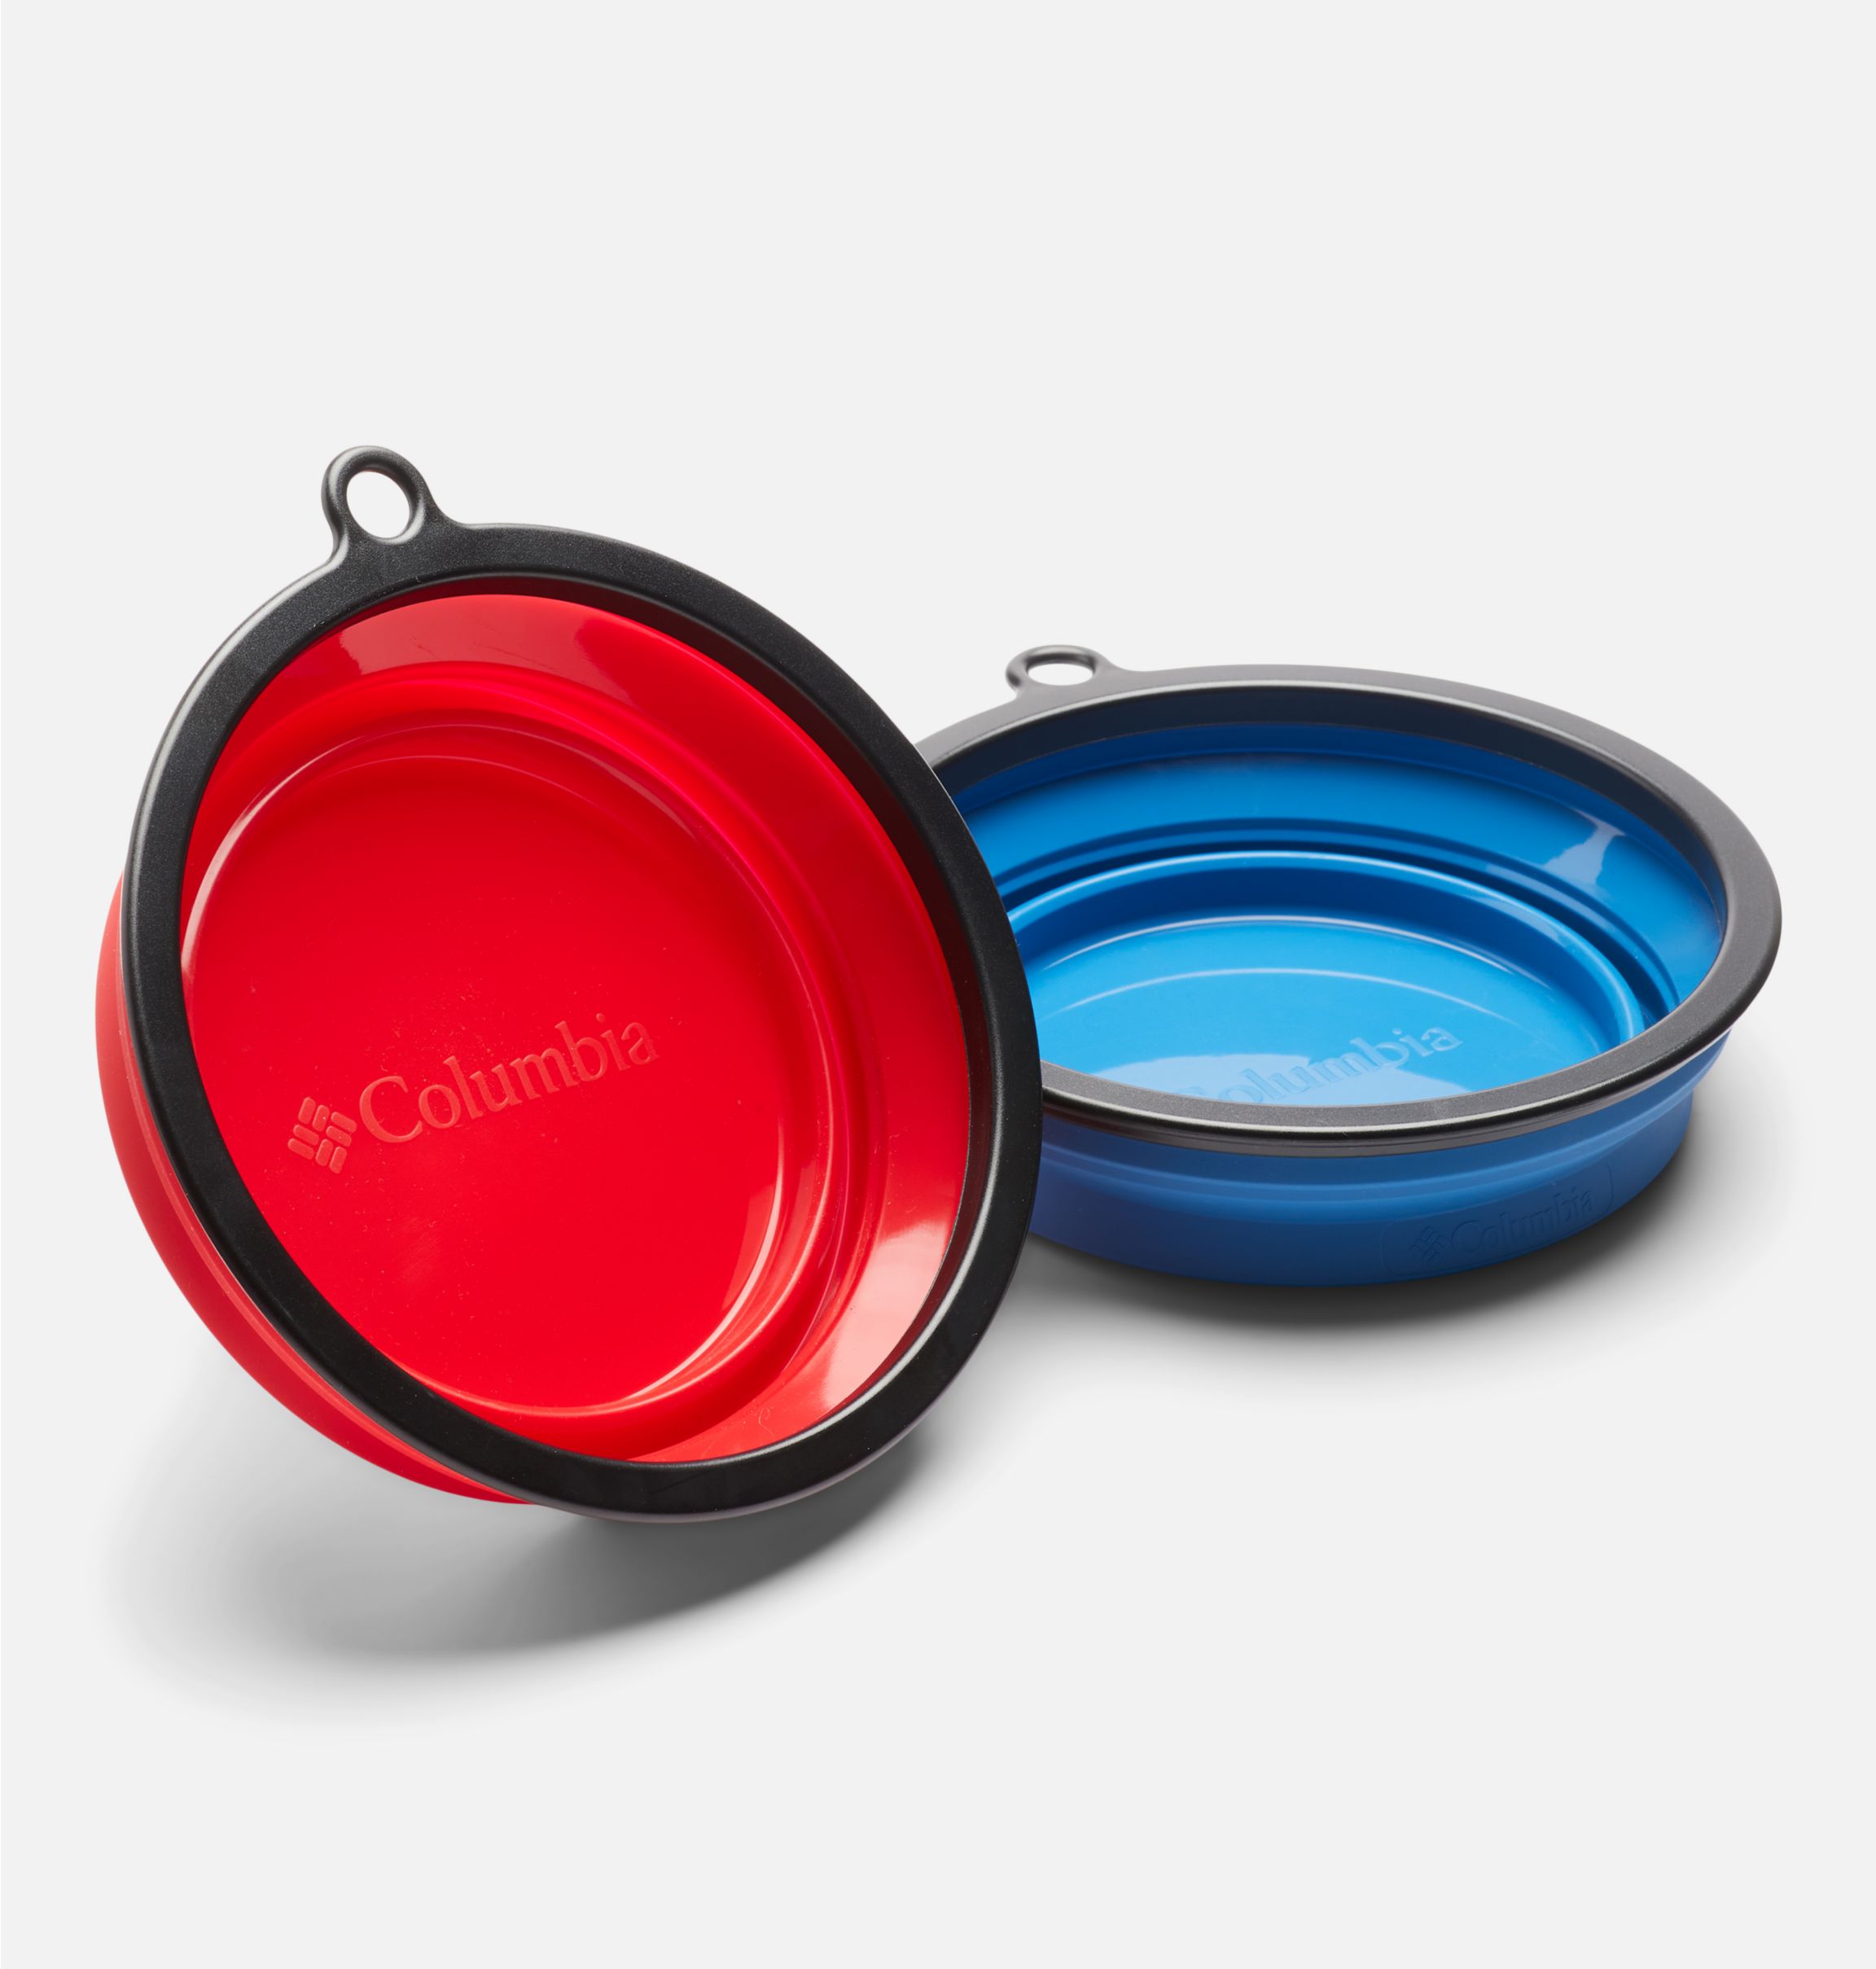 Collapsible Silicon Travel Bowls - 2 Pack - Stansport